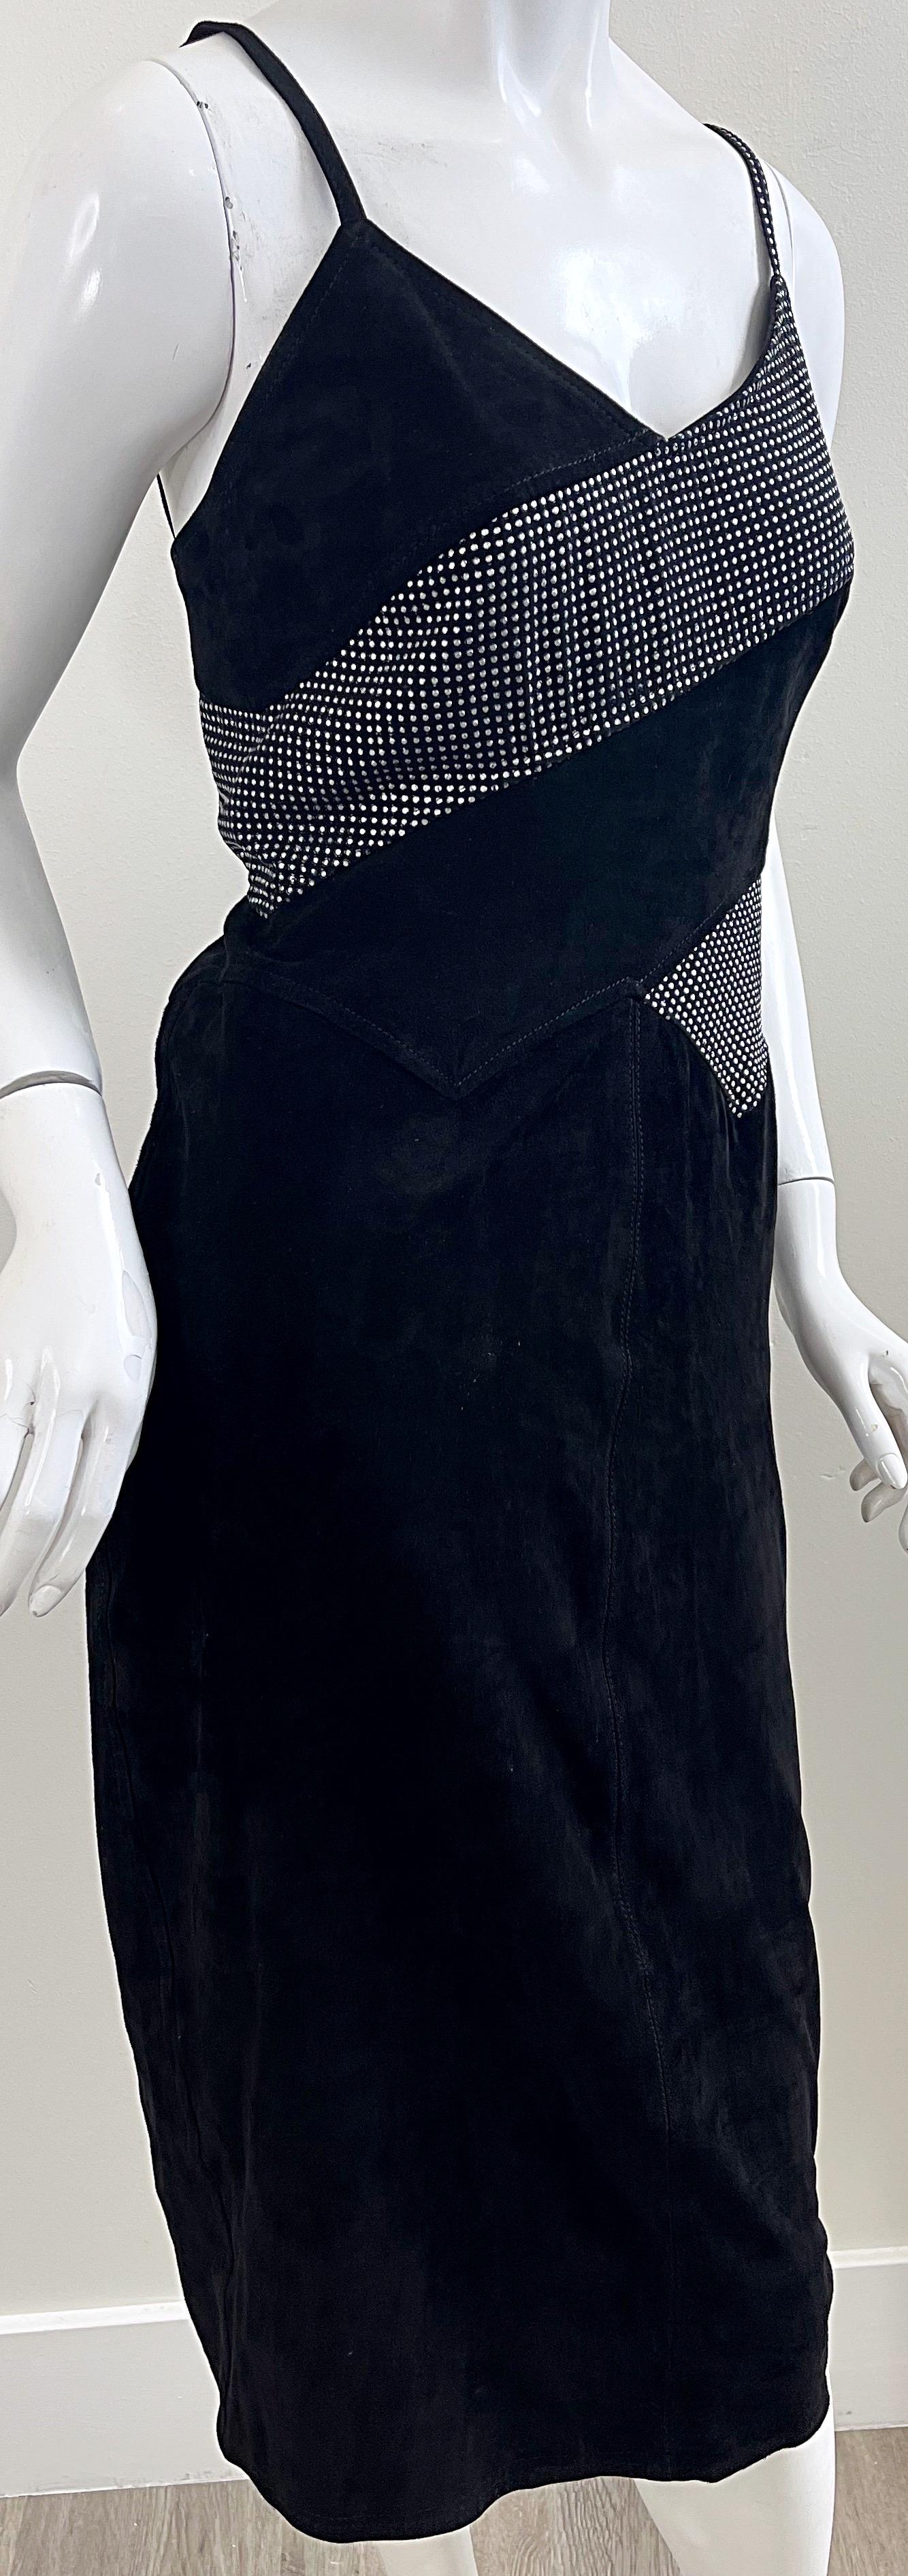 Fendi 1980s Fendissime Black Silver Suede Leather Vintage 80s Hand Painted Dress For Sale 10